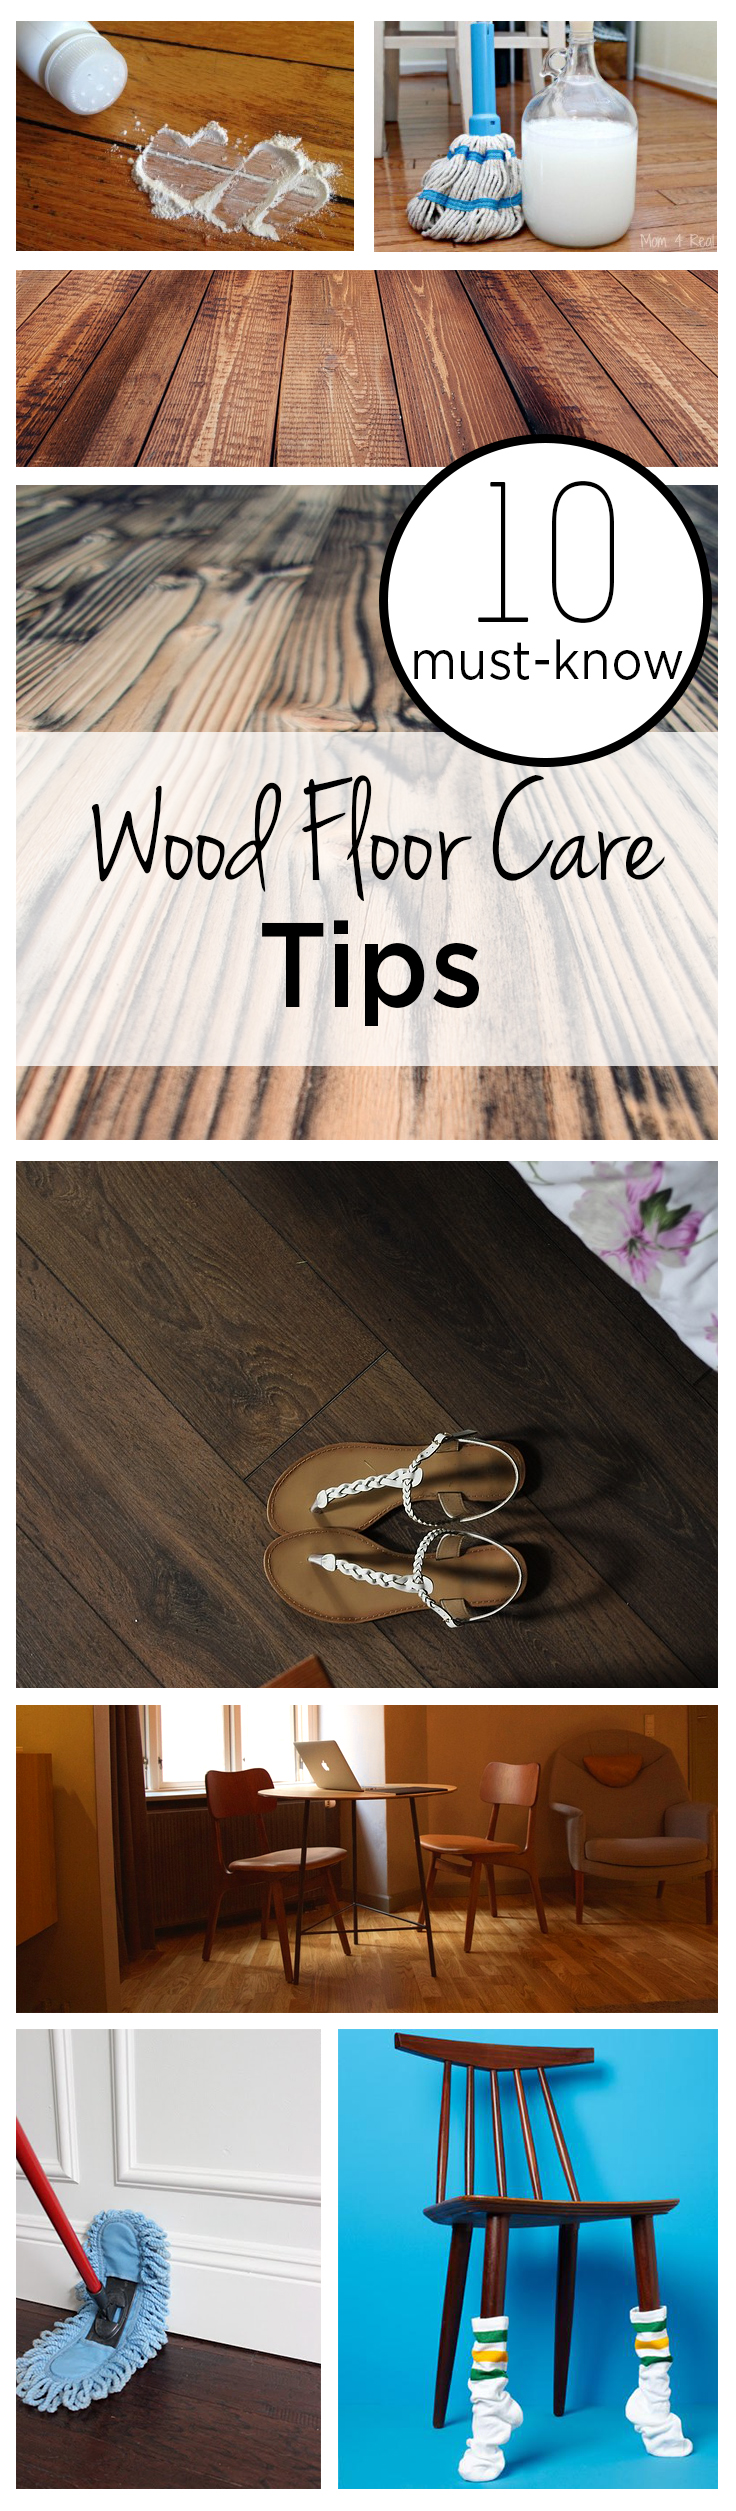 Cleaning hacks, home care hacks, home care tips and tricks, cleaning tips and tricks, popular pin, DIY clean, DIY home decor, home decor, home decor hacks.